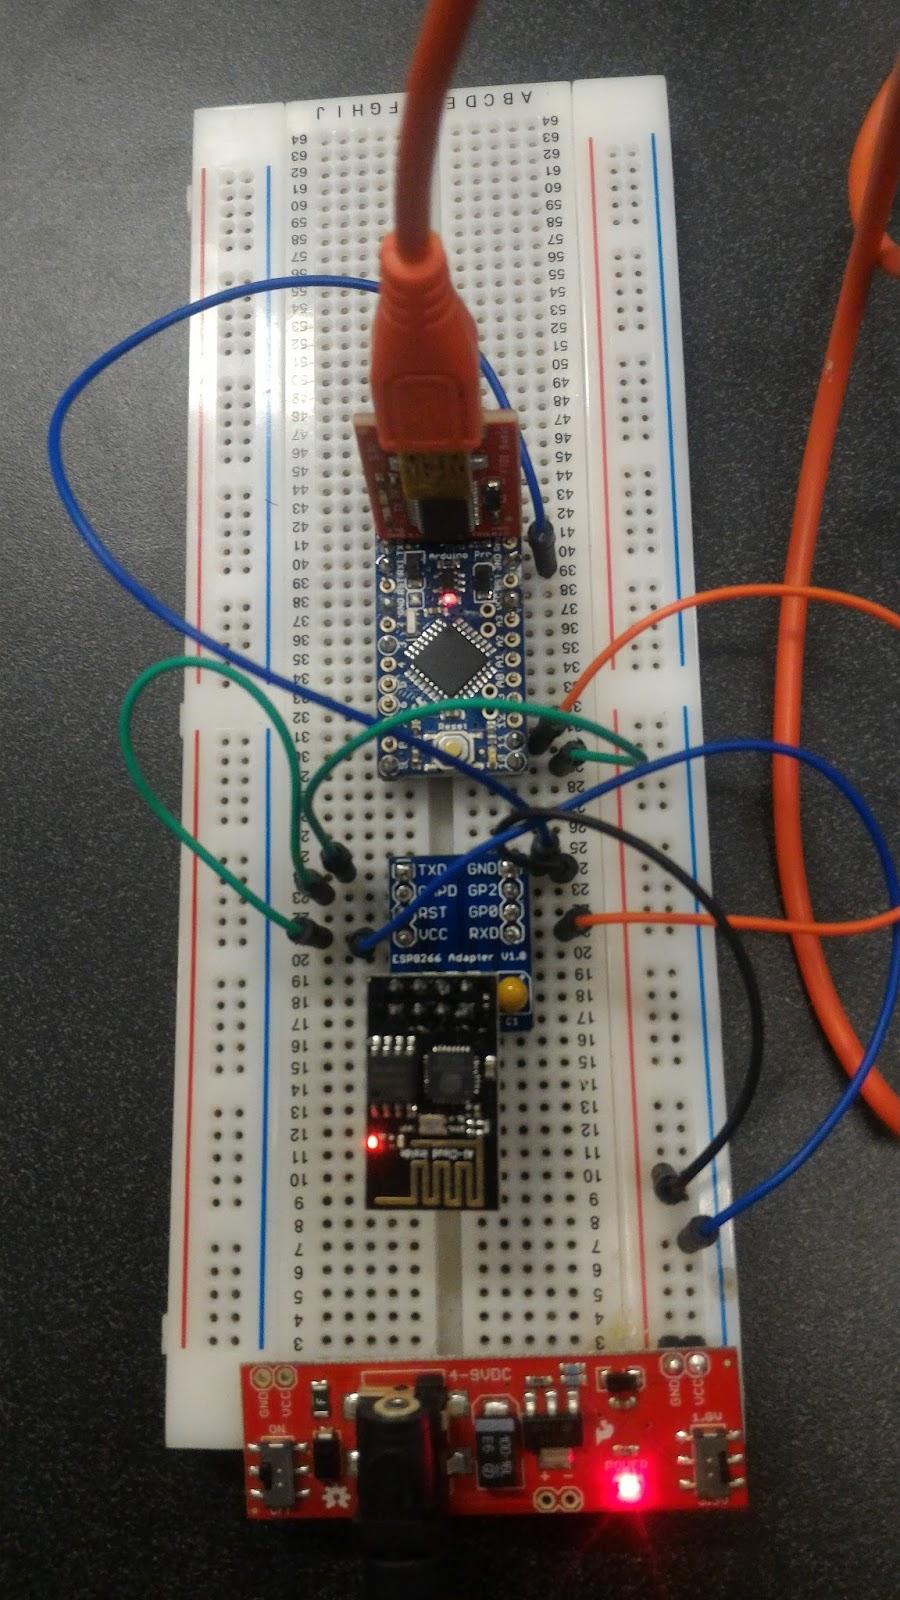 communication (which is configured in software). Figure 3 shows the hardware connections between the ESP8266 and the Arduino.